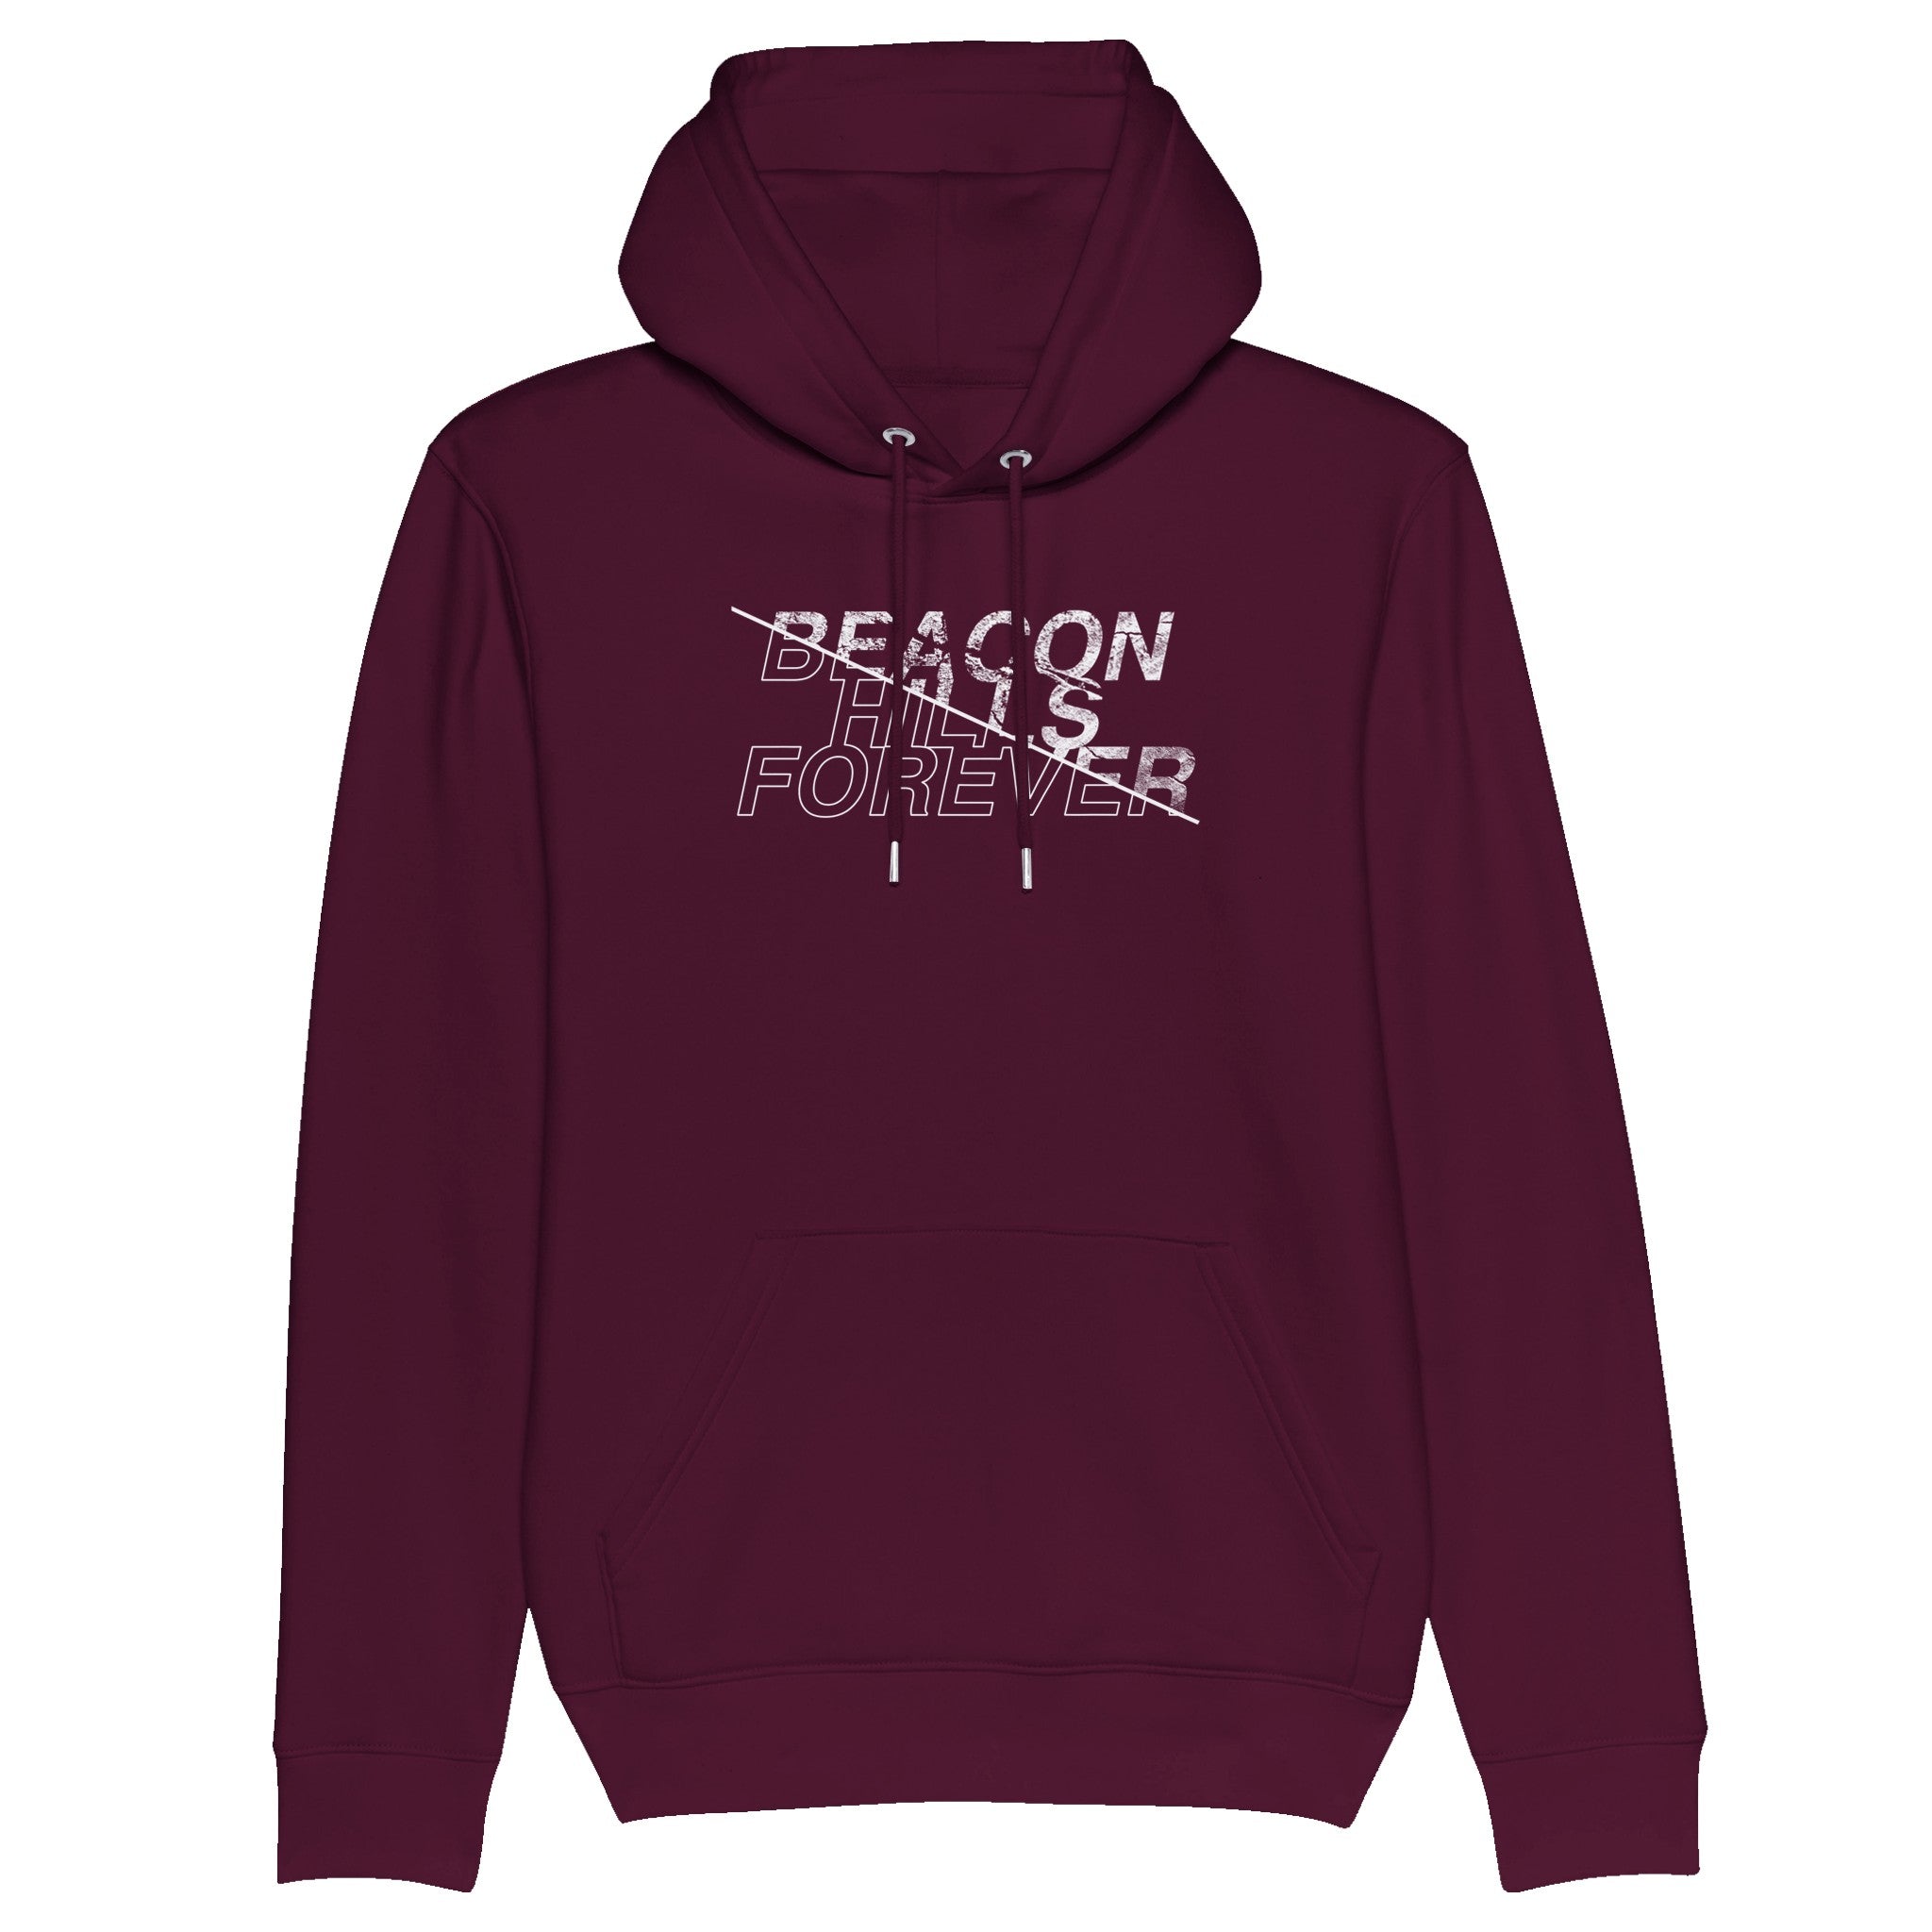 BEACON HILLS FOREVER Hoodie